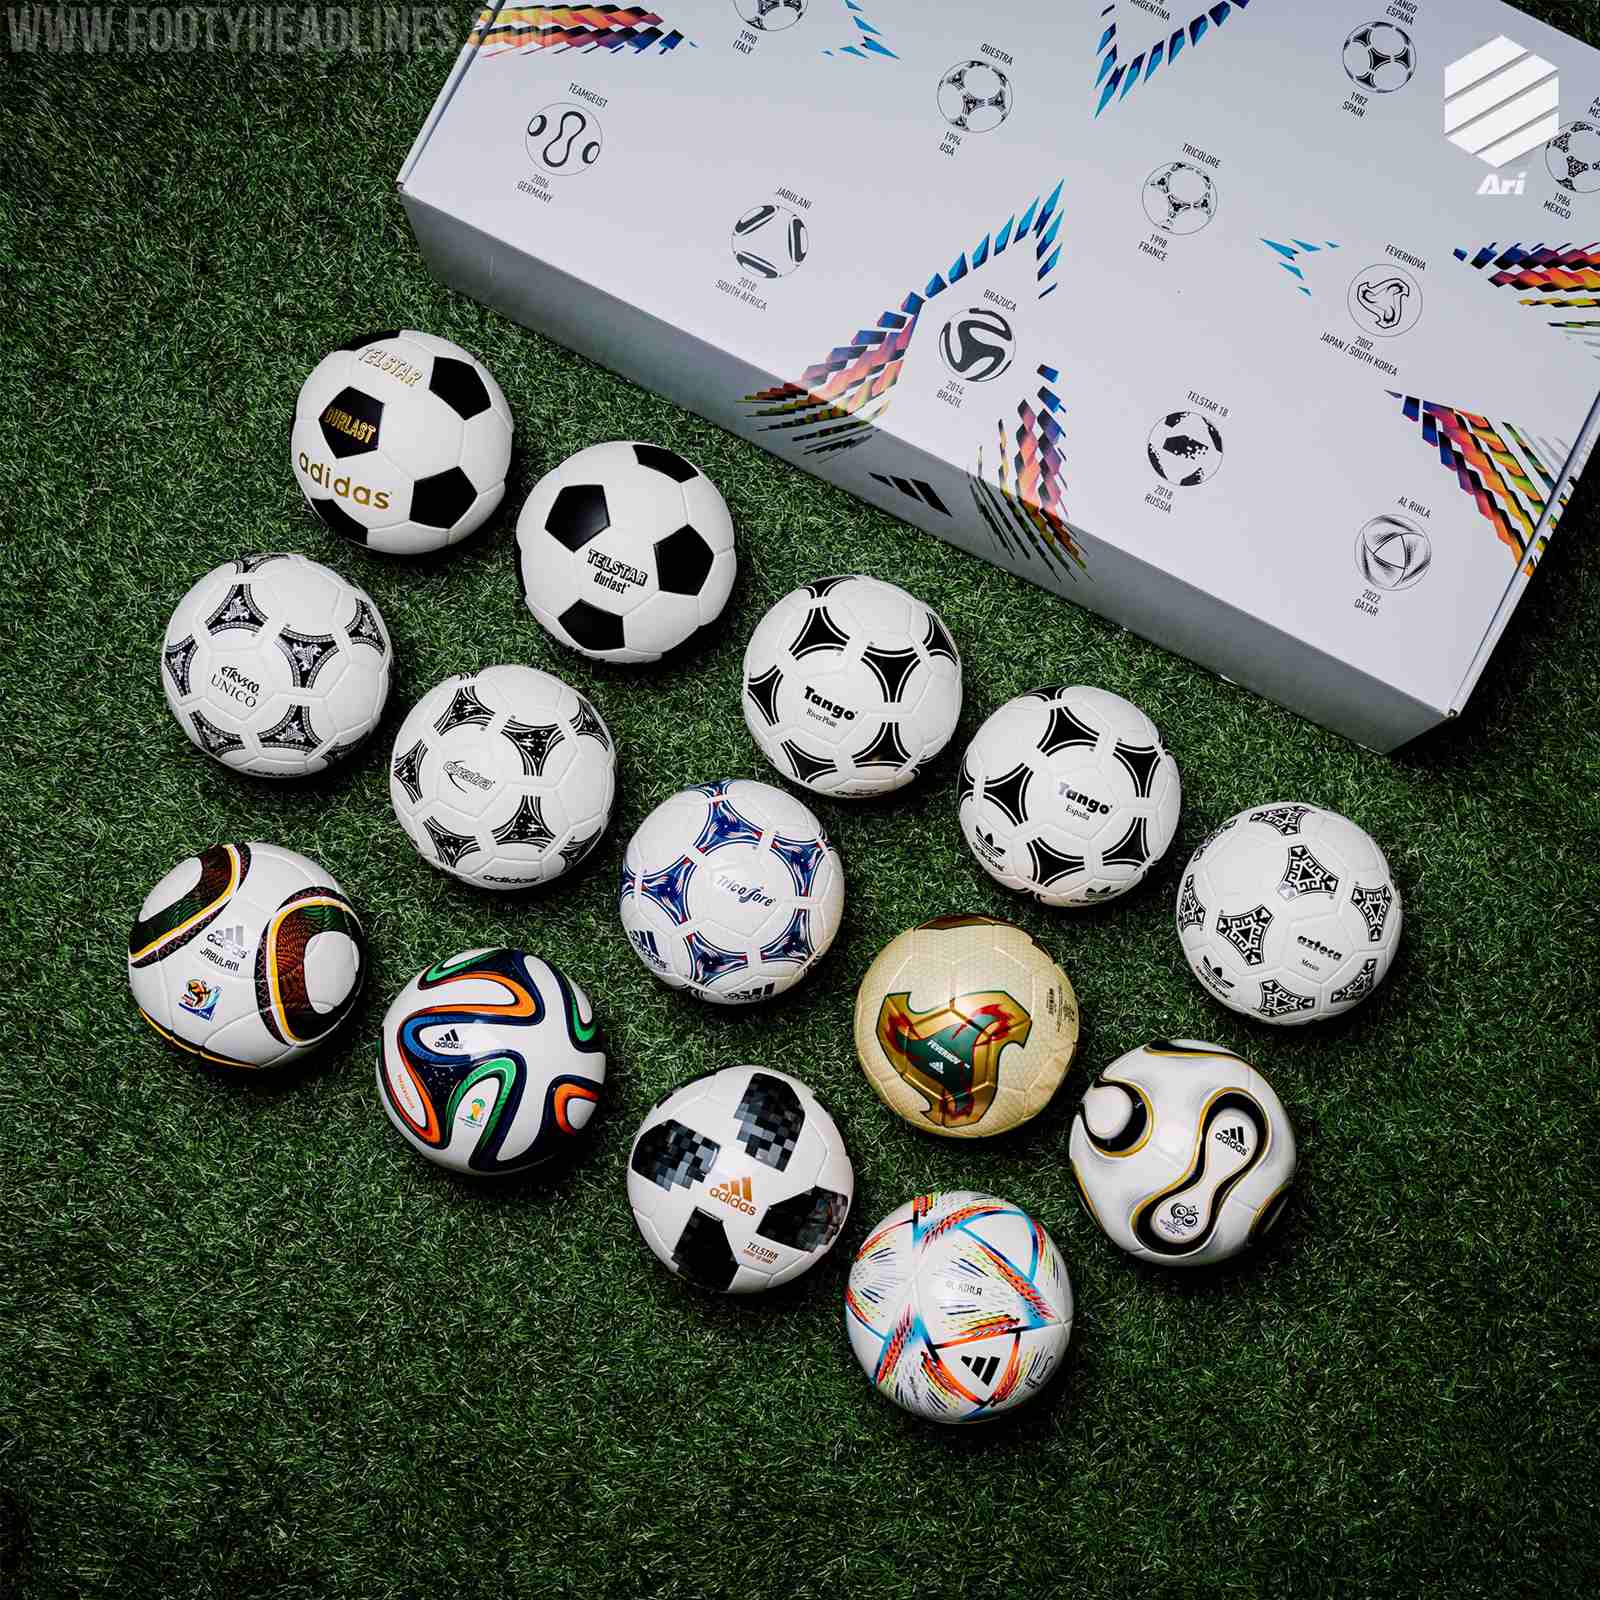 World Cup Mini Ball - The Football Factory